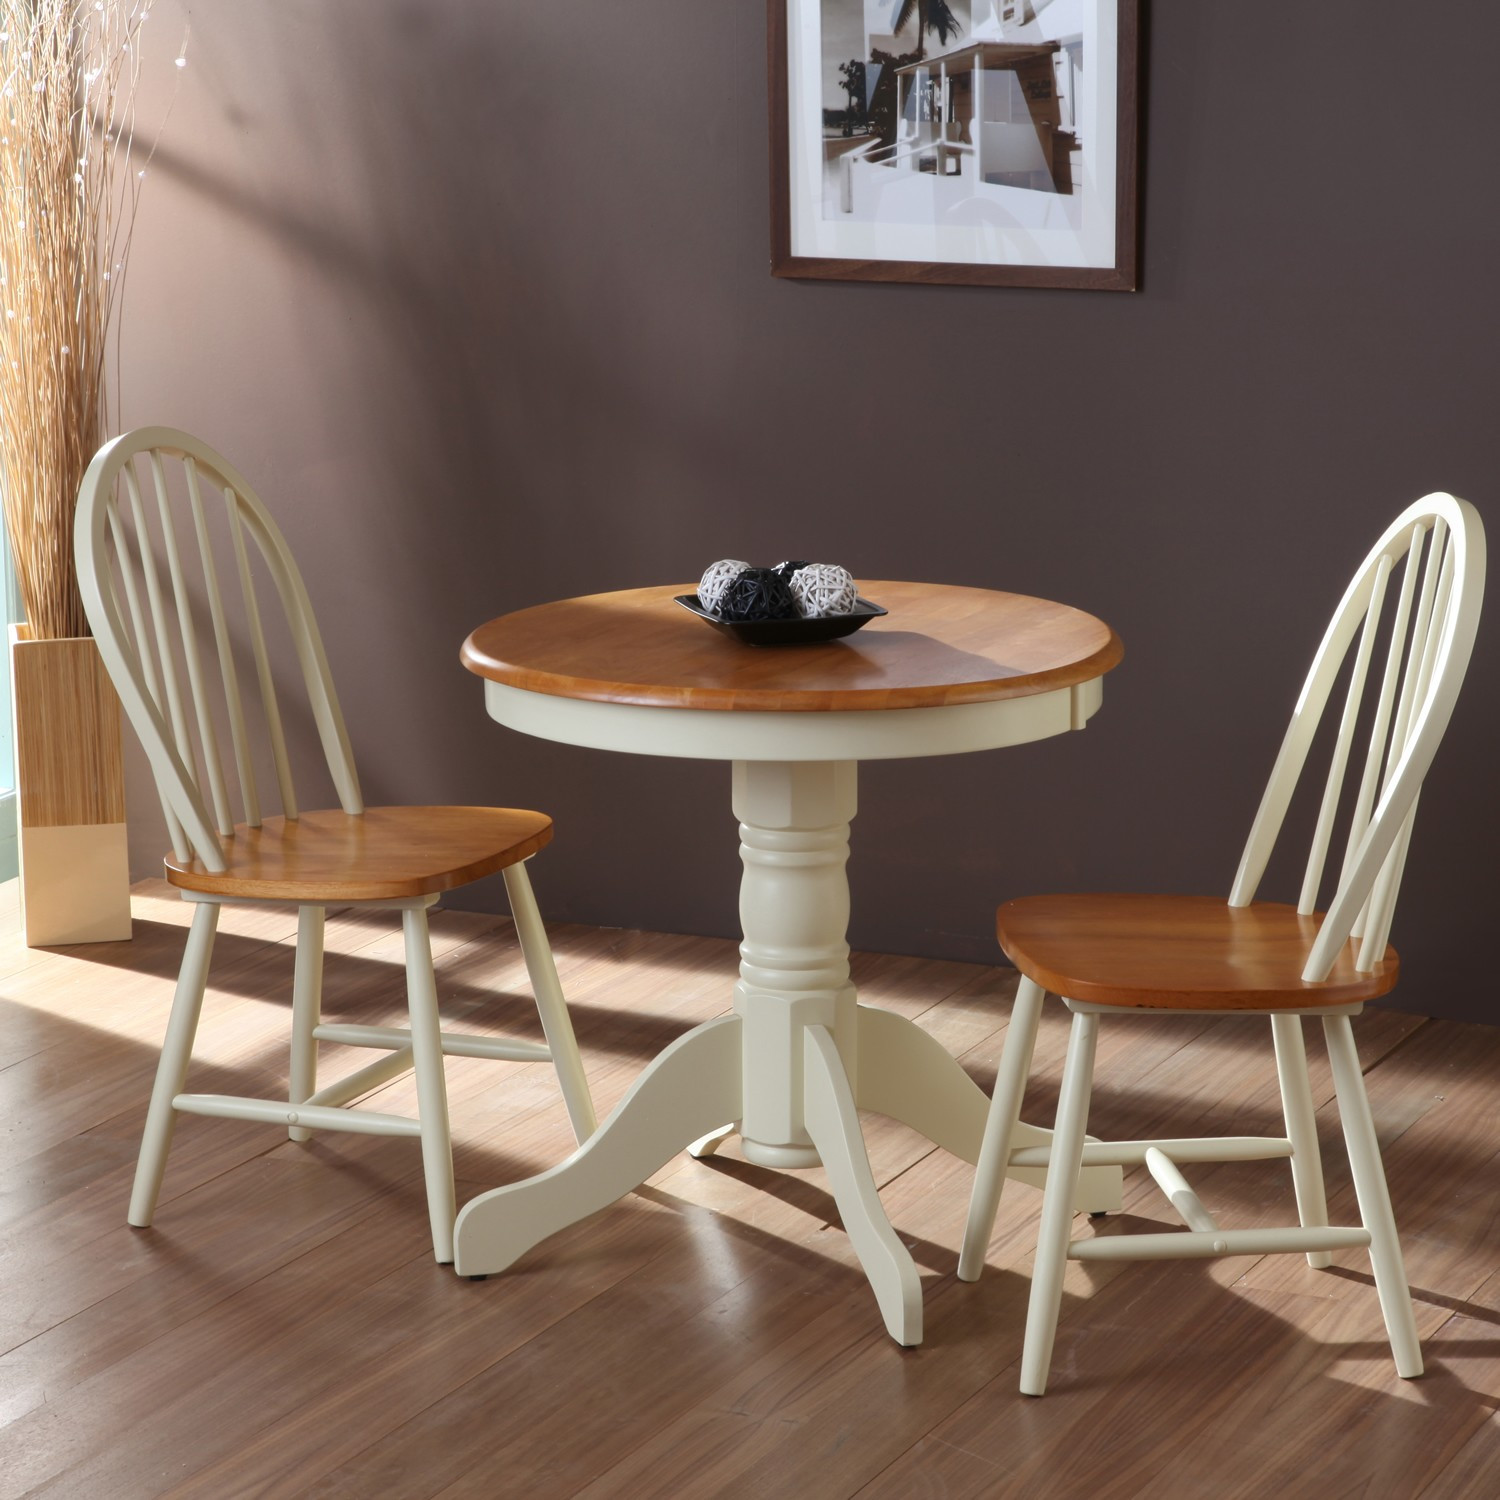 Small White Kitchen Tables
 Beautiful White Round Kitchen Table and Chairs – HomesFeed